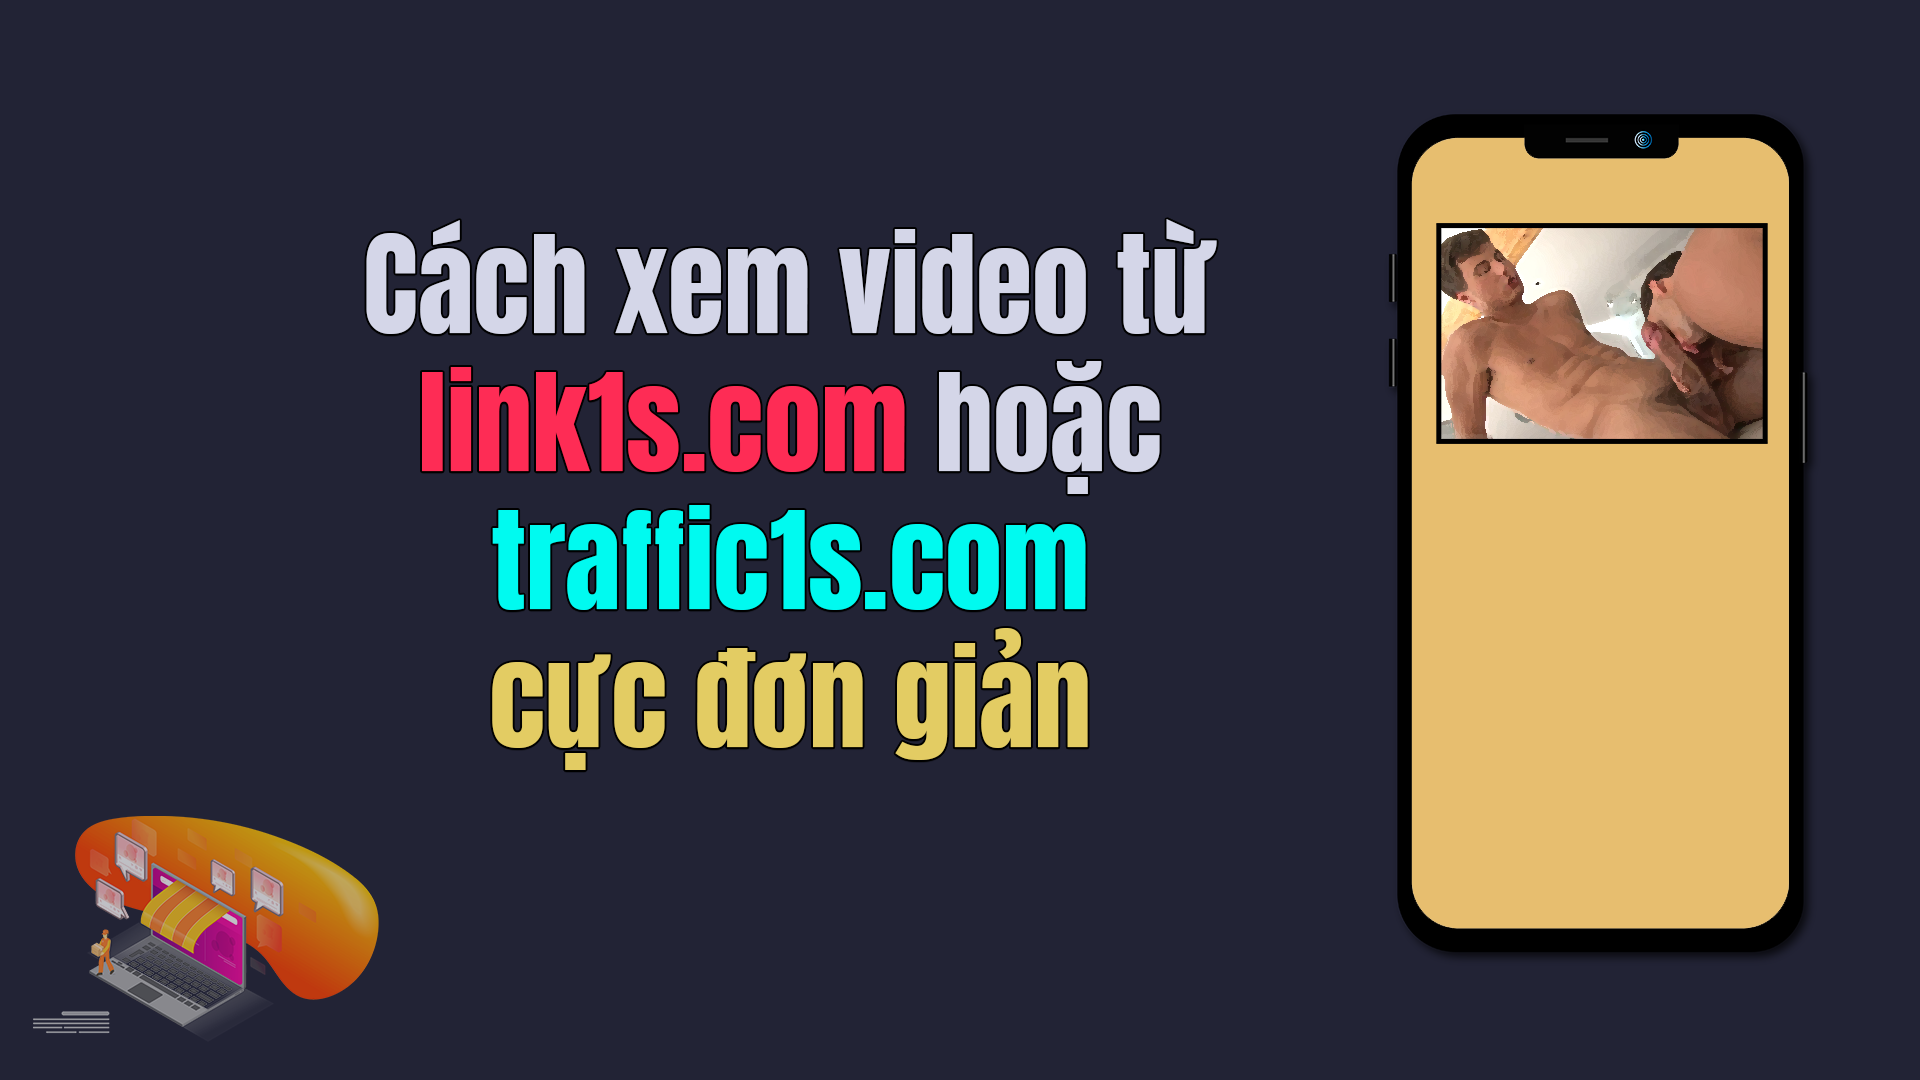 How to watch videos from Link1s.com or Traffic1s.com sex gay handsome